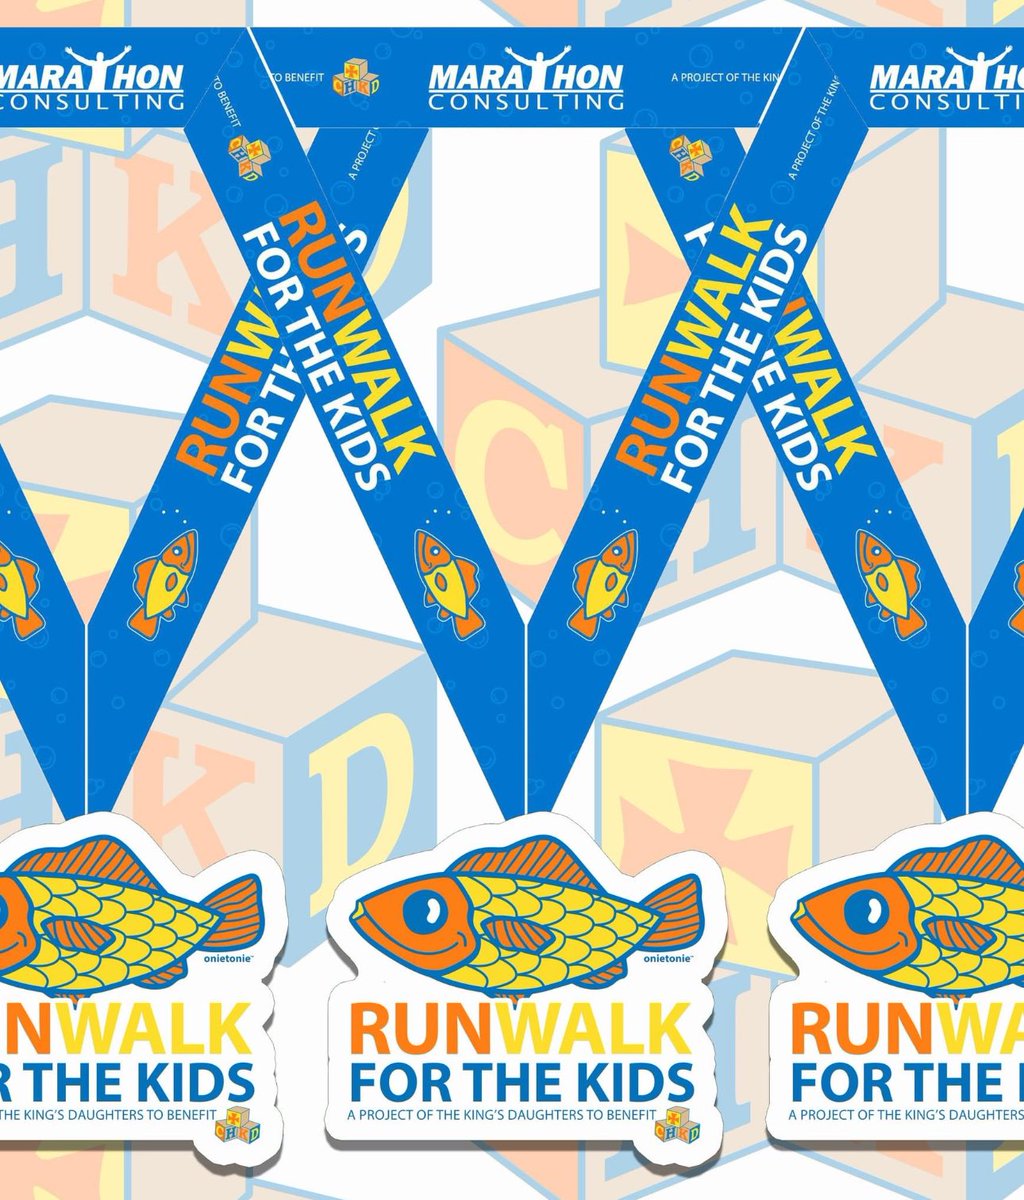 One month away from the @_CHKD #runwalkforthekids by @chkdkd. Get registered today if you haven't already! May 11th in Downtown Norfolk. We'll be there with the OnieTonie Pop-Up!
#onietonie #chkd #chkdrunwalk #runningcommunity #run757